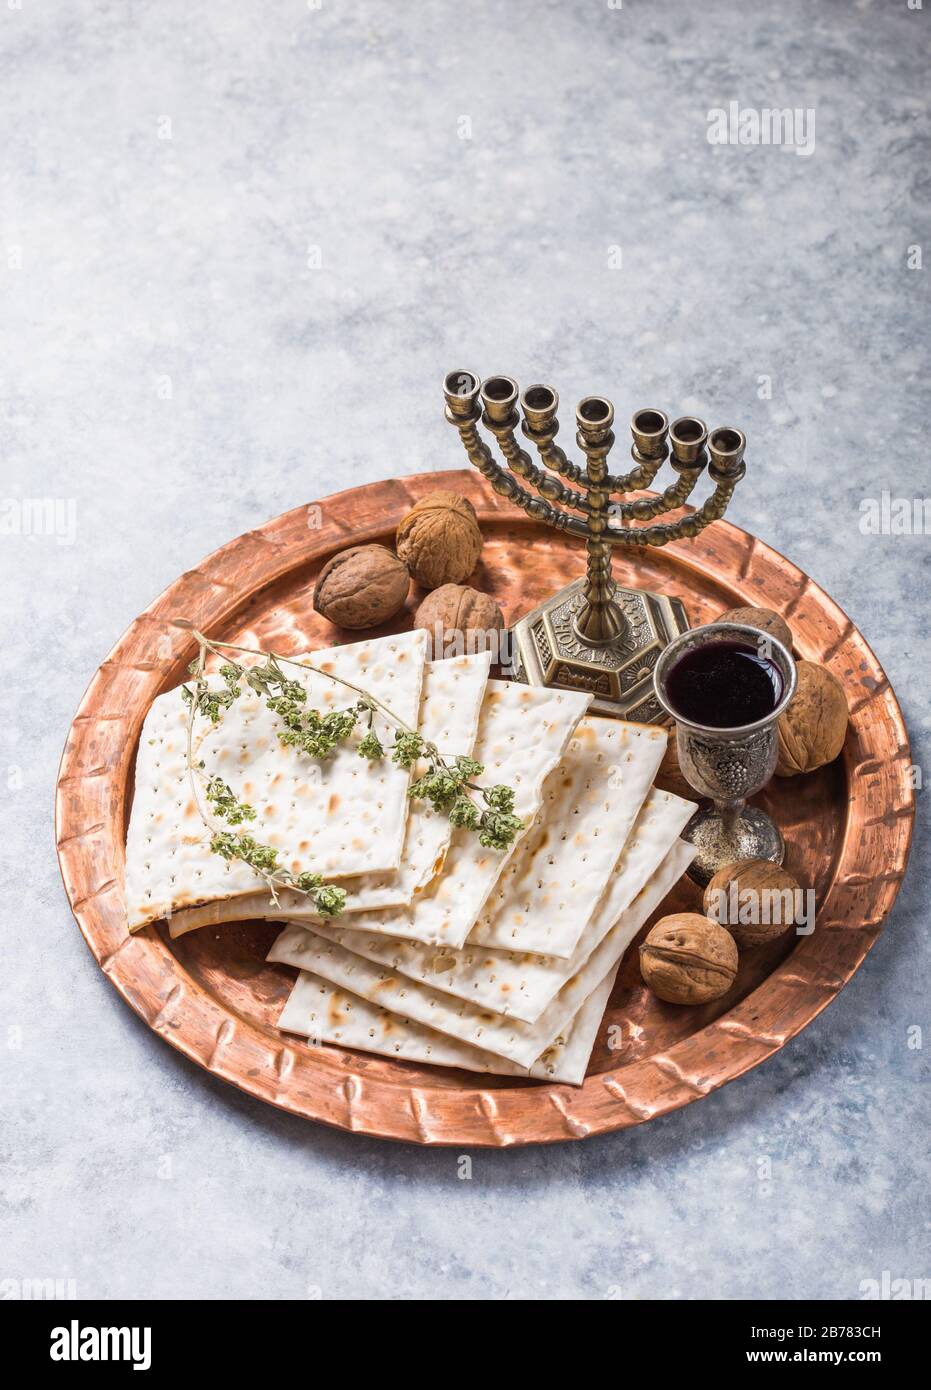 Passover, the Feast of Unleavened Bread, matzah bread and red wine glasses on the shinny round metal tray. Stock Photo